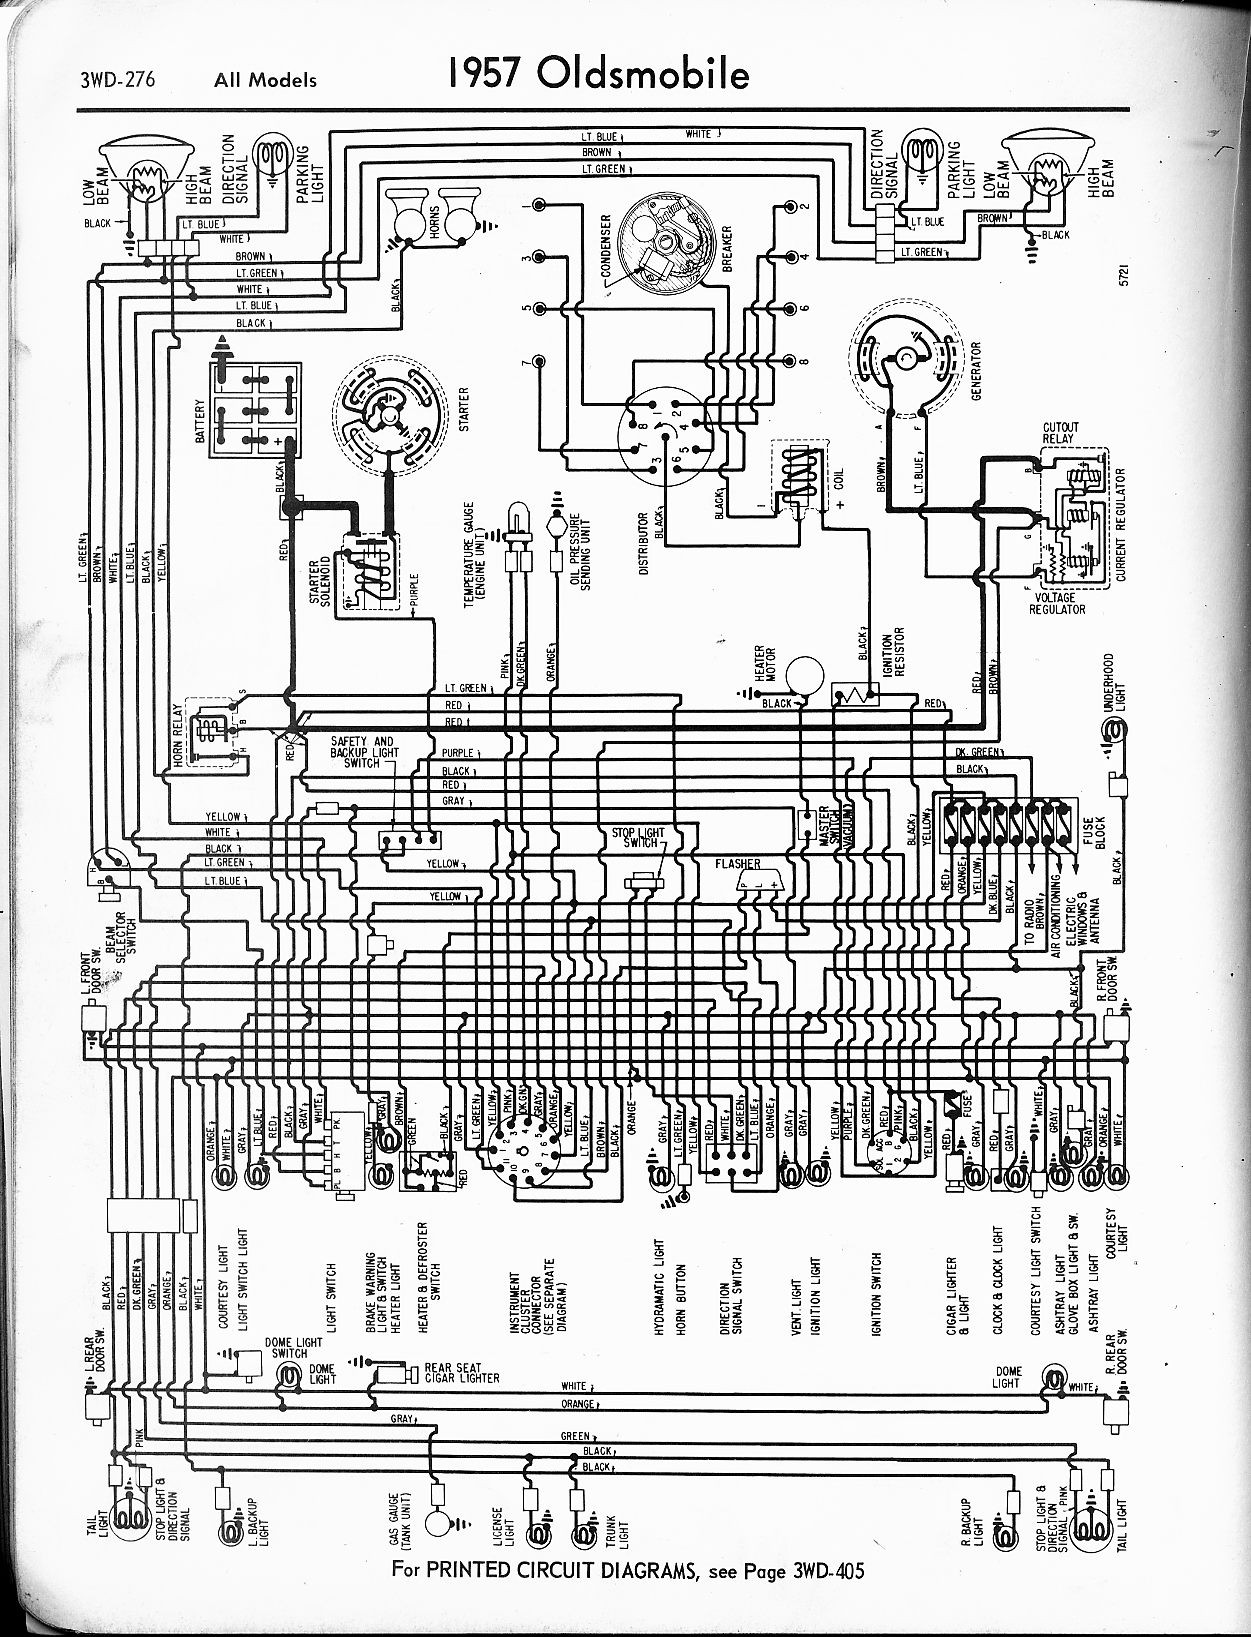 98 ford F150 Wiring Diagram Oldsmobile Wiring Diagrams the Old Car Manual Project Of 98 ford F150 Wiring Diagram